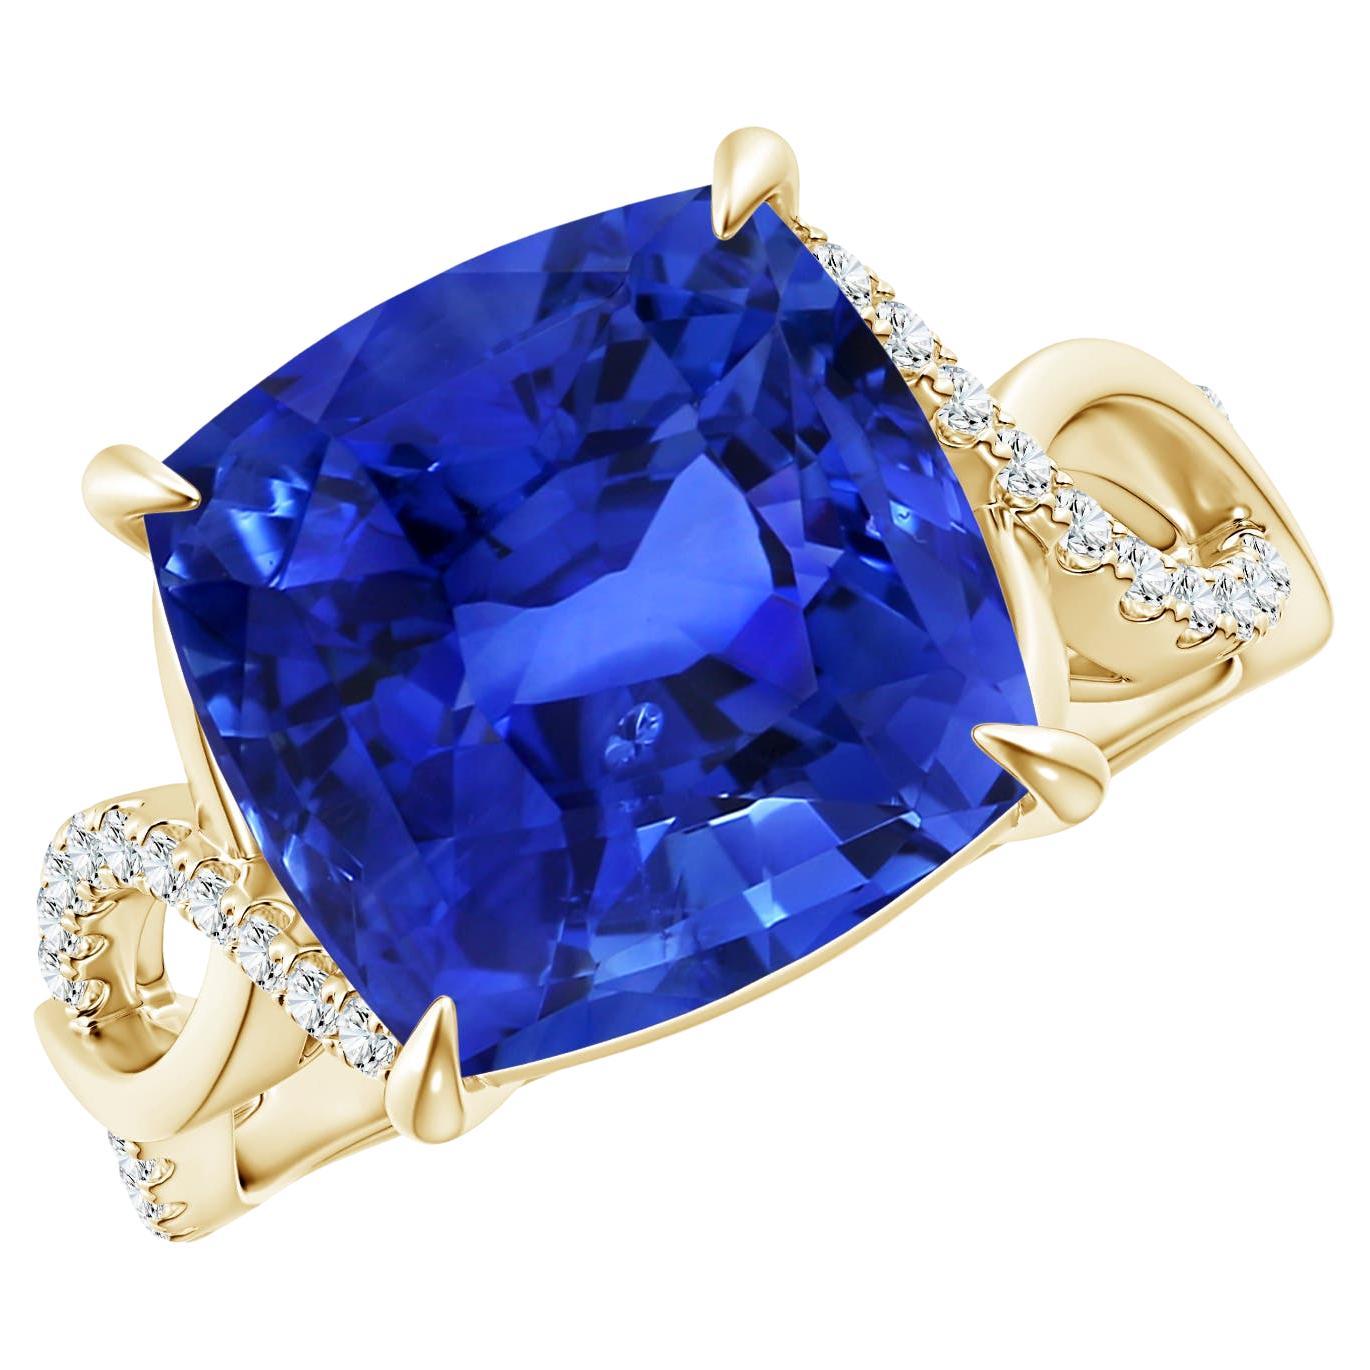 For Sale:  Angara GIA Certified Natural Blue Sapphire Ring in Yellow Gold with Diamonds